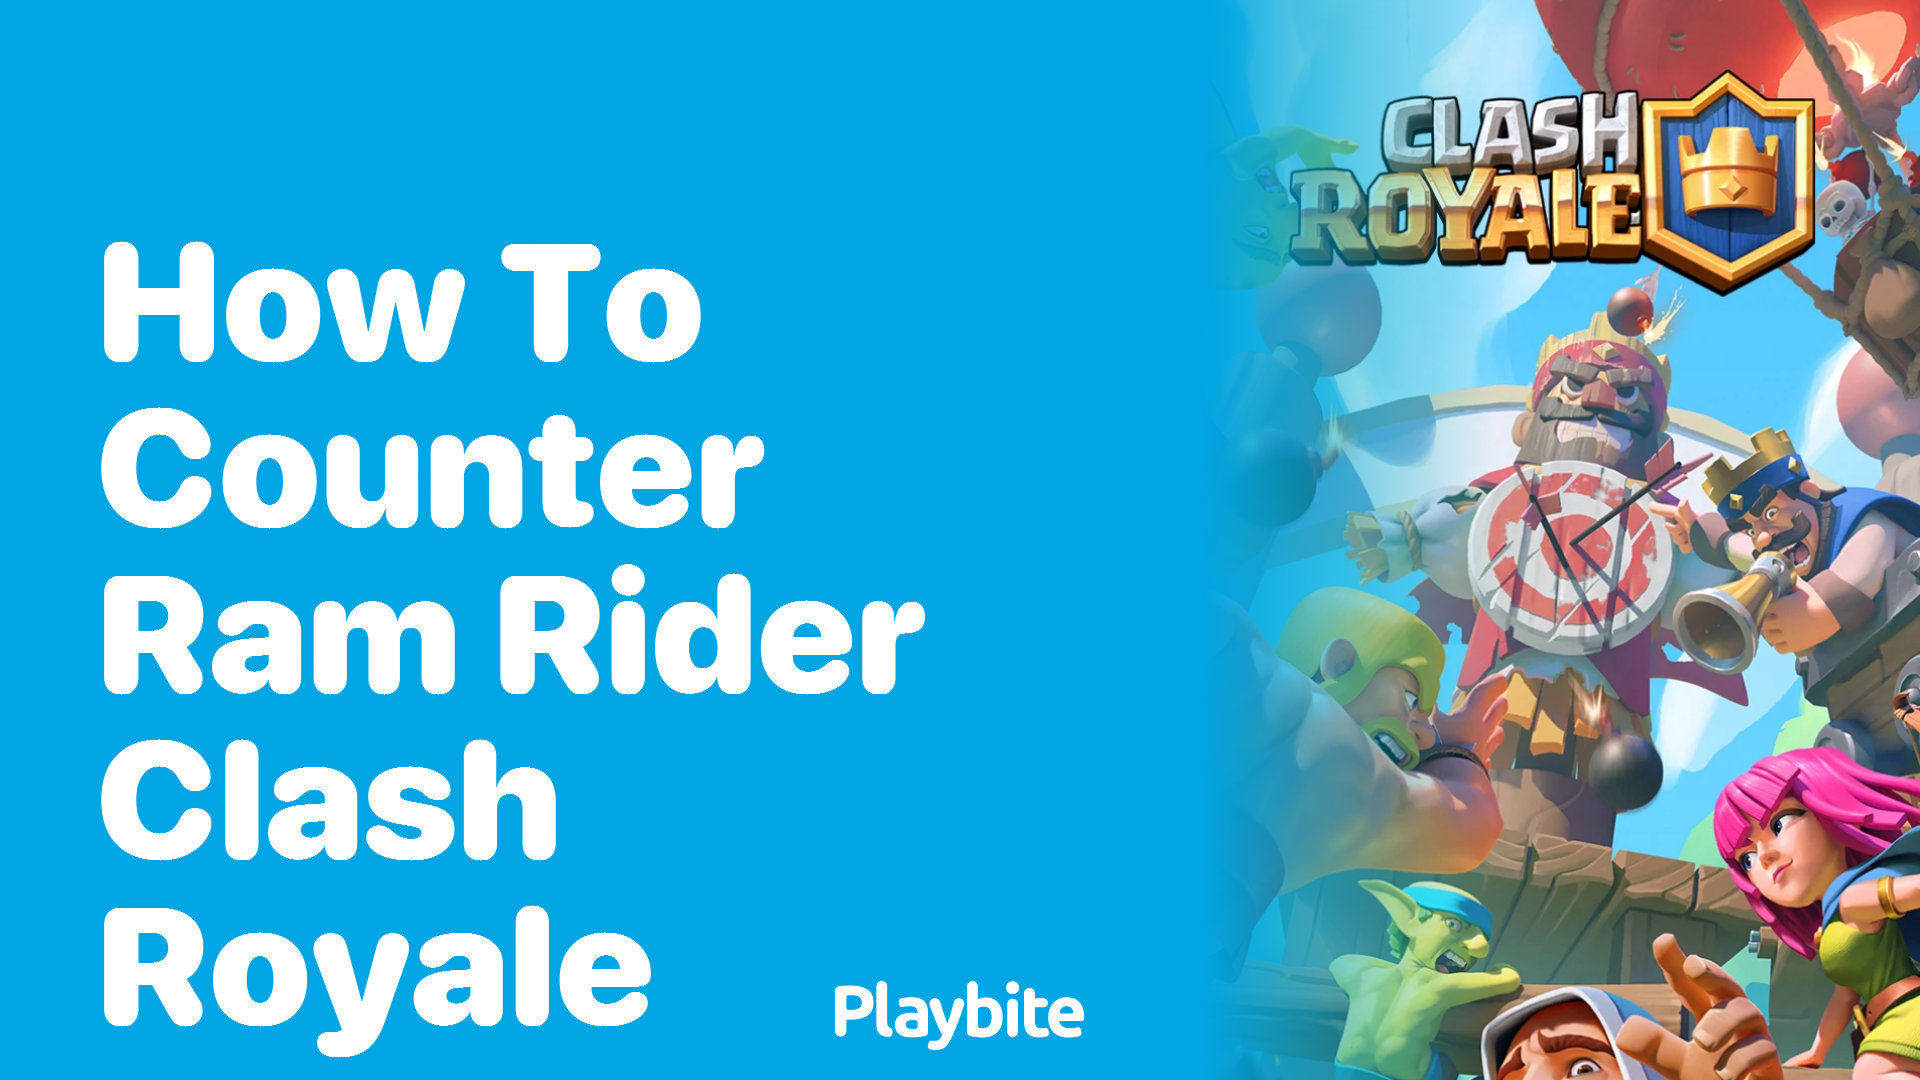 How to Counter Ram Rider in Clash Royale